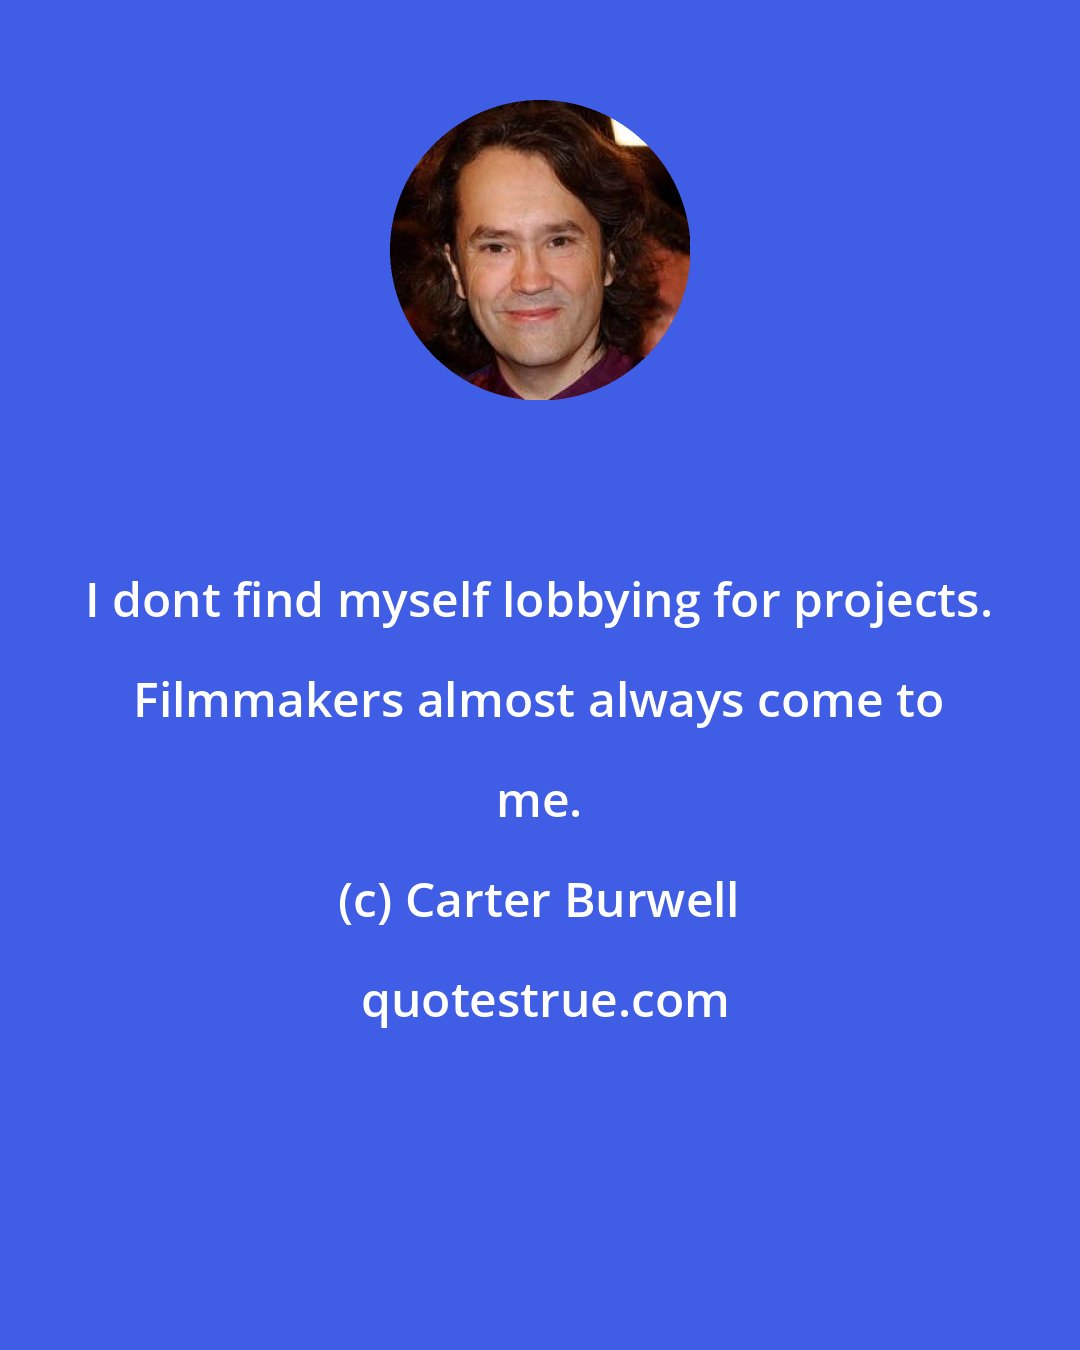 Carter Burwell: I dont find myself lobbying for projects. Filmmakers almost always come to me.